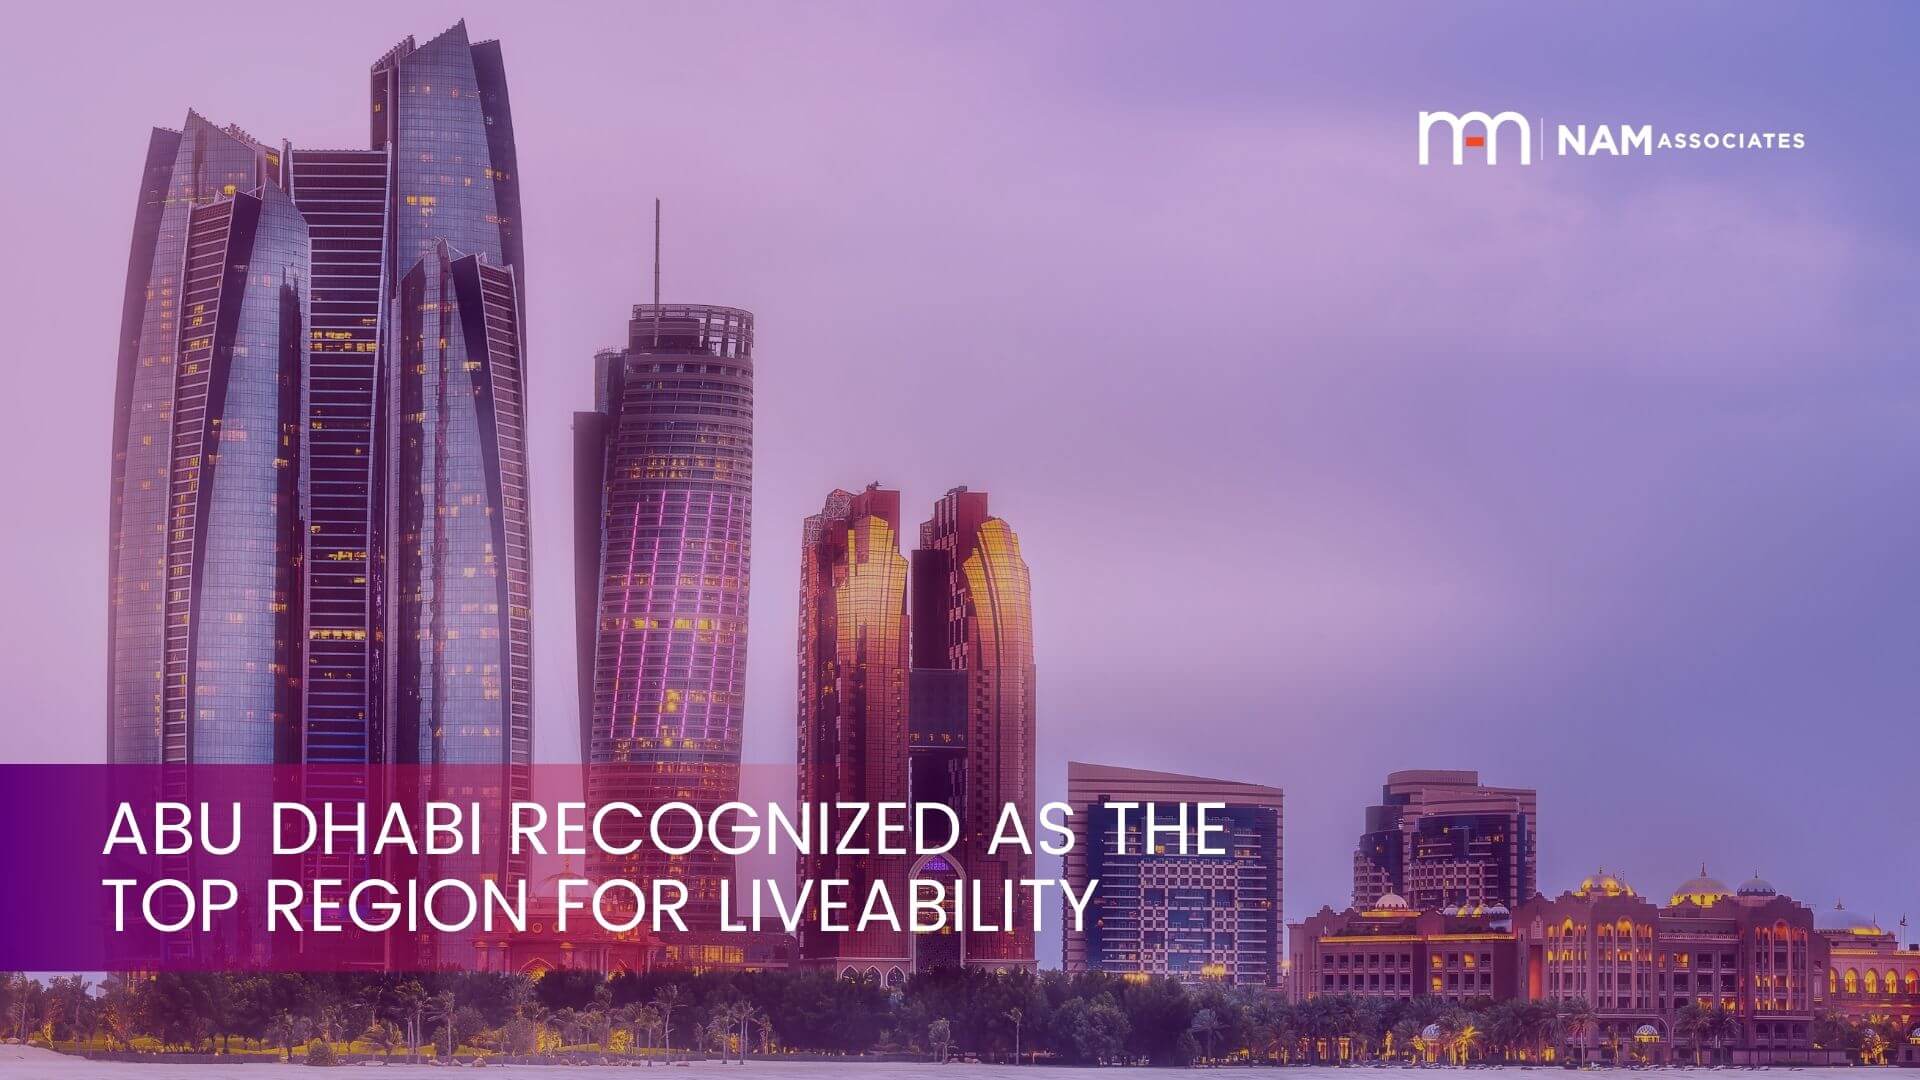 Abu Dhabi recognized as the top region for liveability